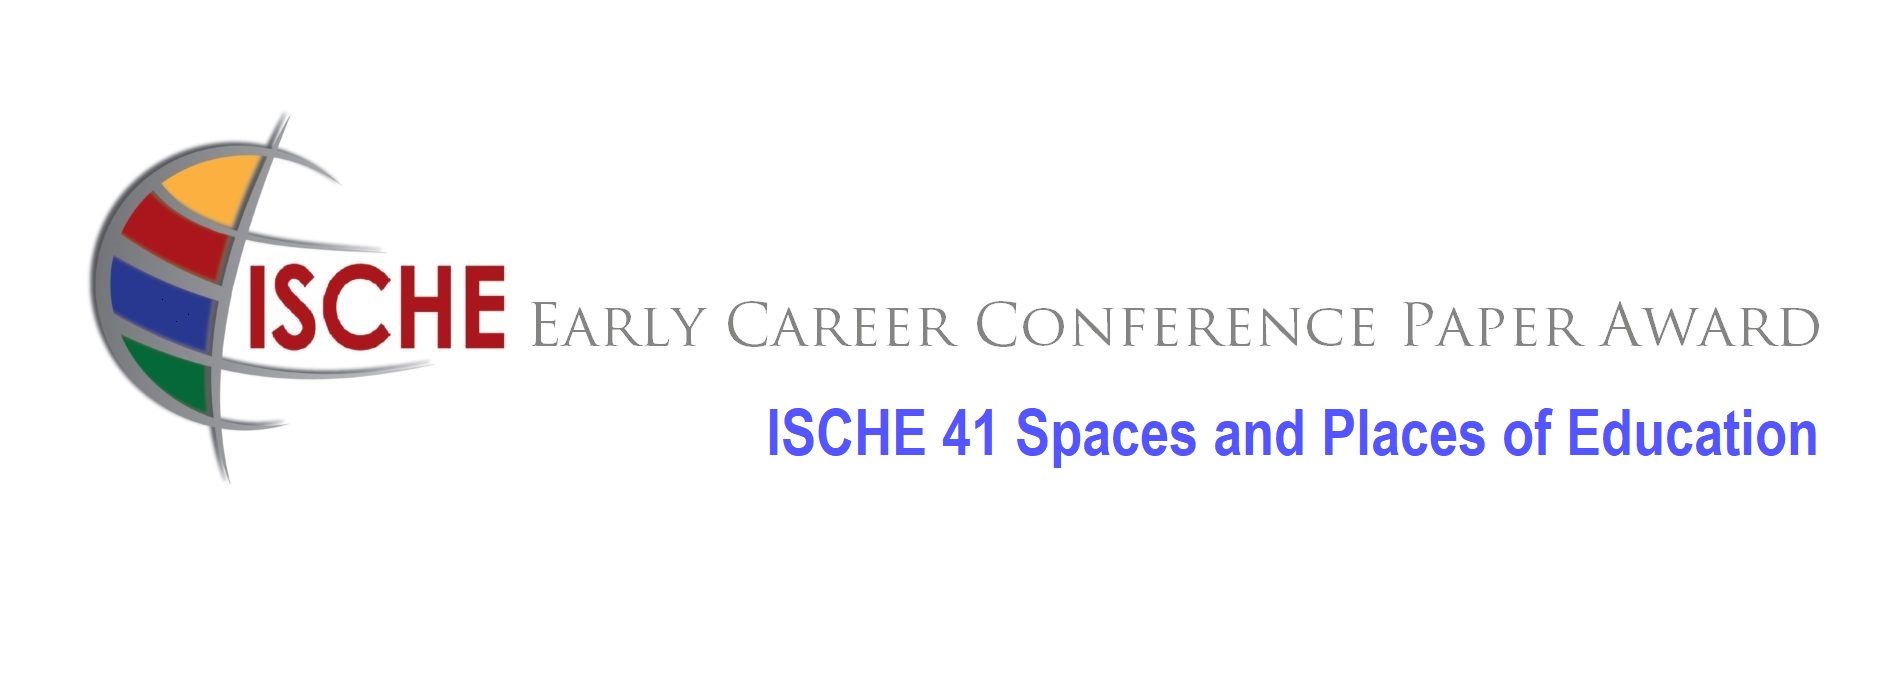 Submissions invited for 2019 ISCHE Early Career Conference Paper Award